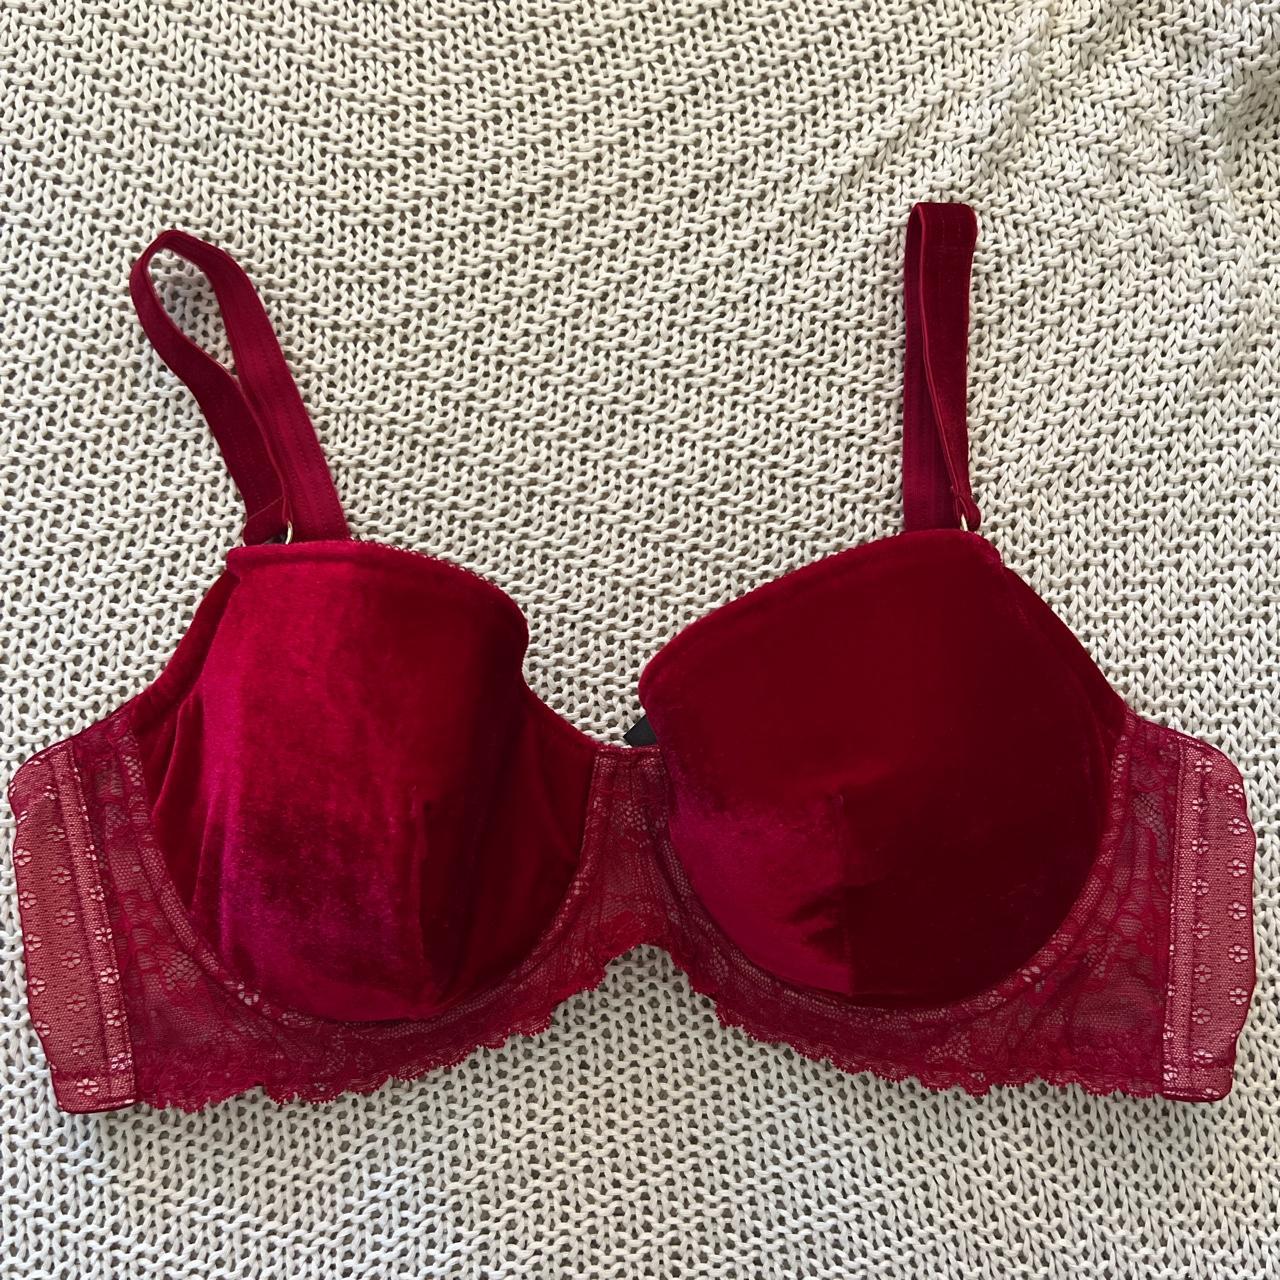 NWOT meundies bralettes Size xs Sizing pictured above - Depop